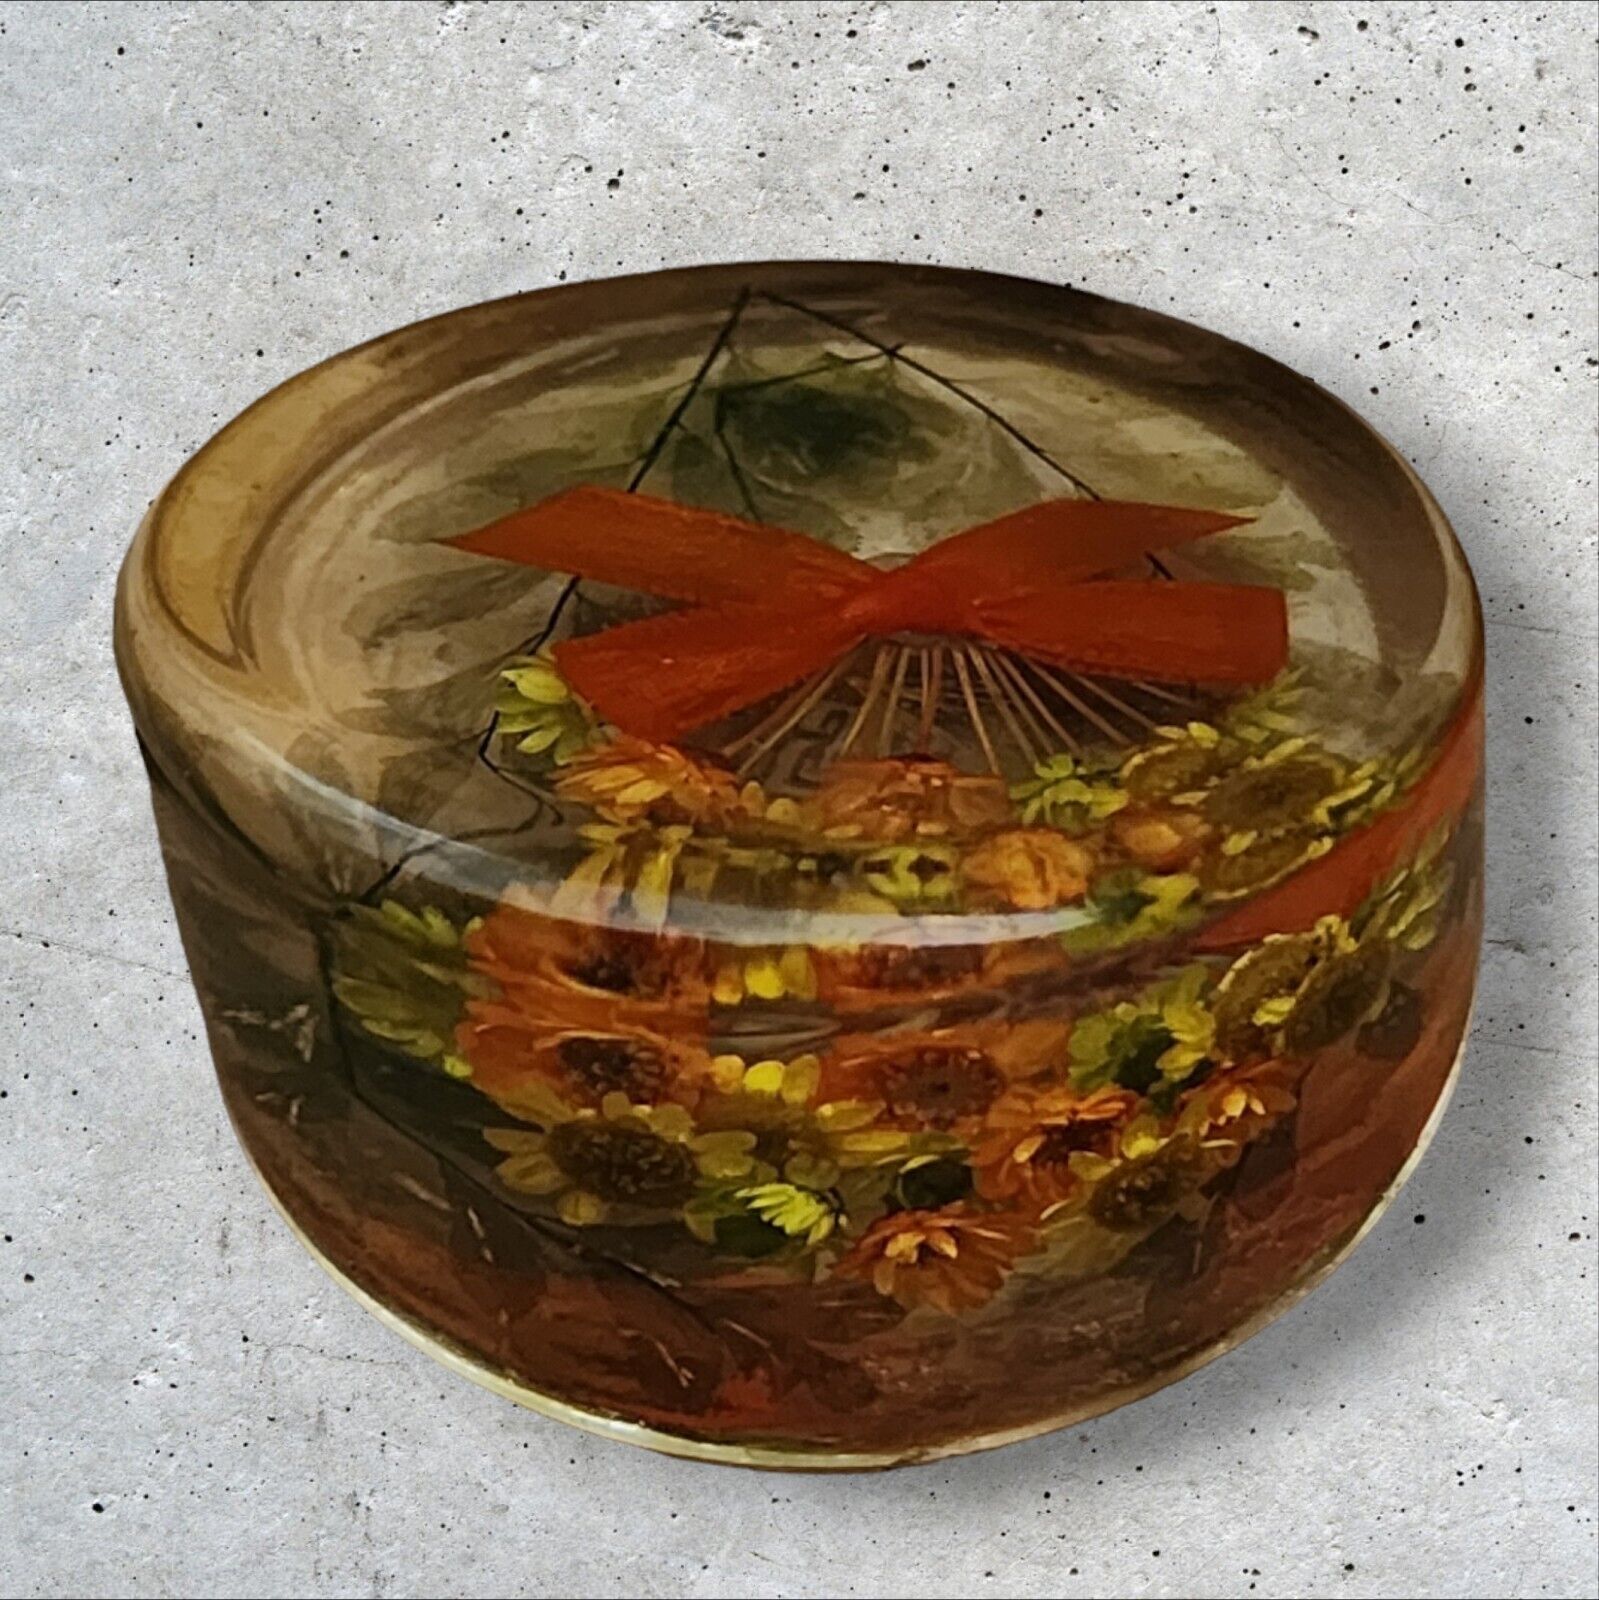 VINTAGE 1960s/70s LUCITE ACRYLIC PAPERWEIGHT WITH DRIED FLOWERS OVAL DOME SHAPED